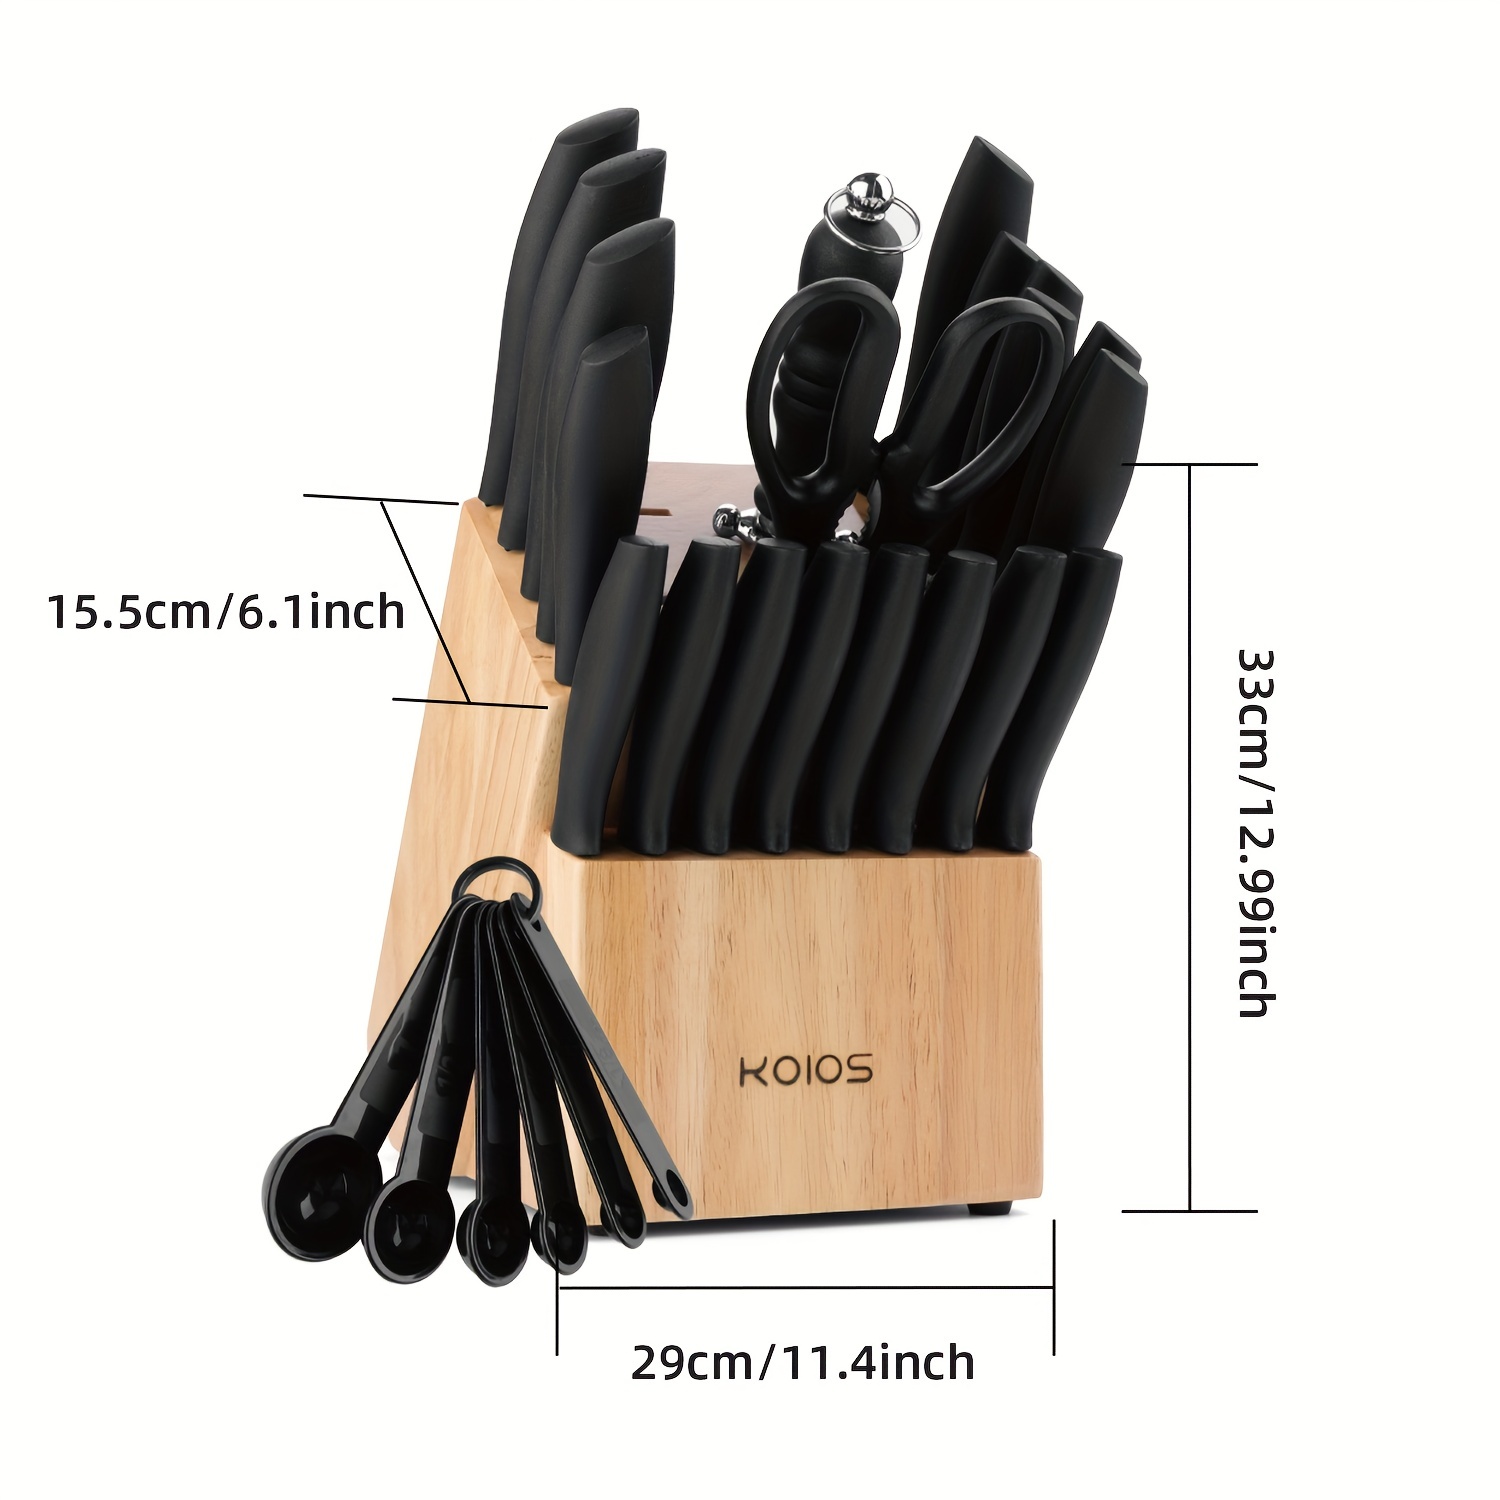 10pcs Kitchen Knives Set With High-carbon Stainless Steel Blades And Wood  Block Set Cutlery Knife Set, Basics 10pcs Kitchen Knifes, Free Shipping  For New Users